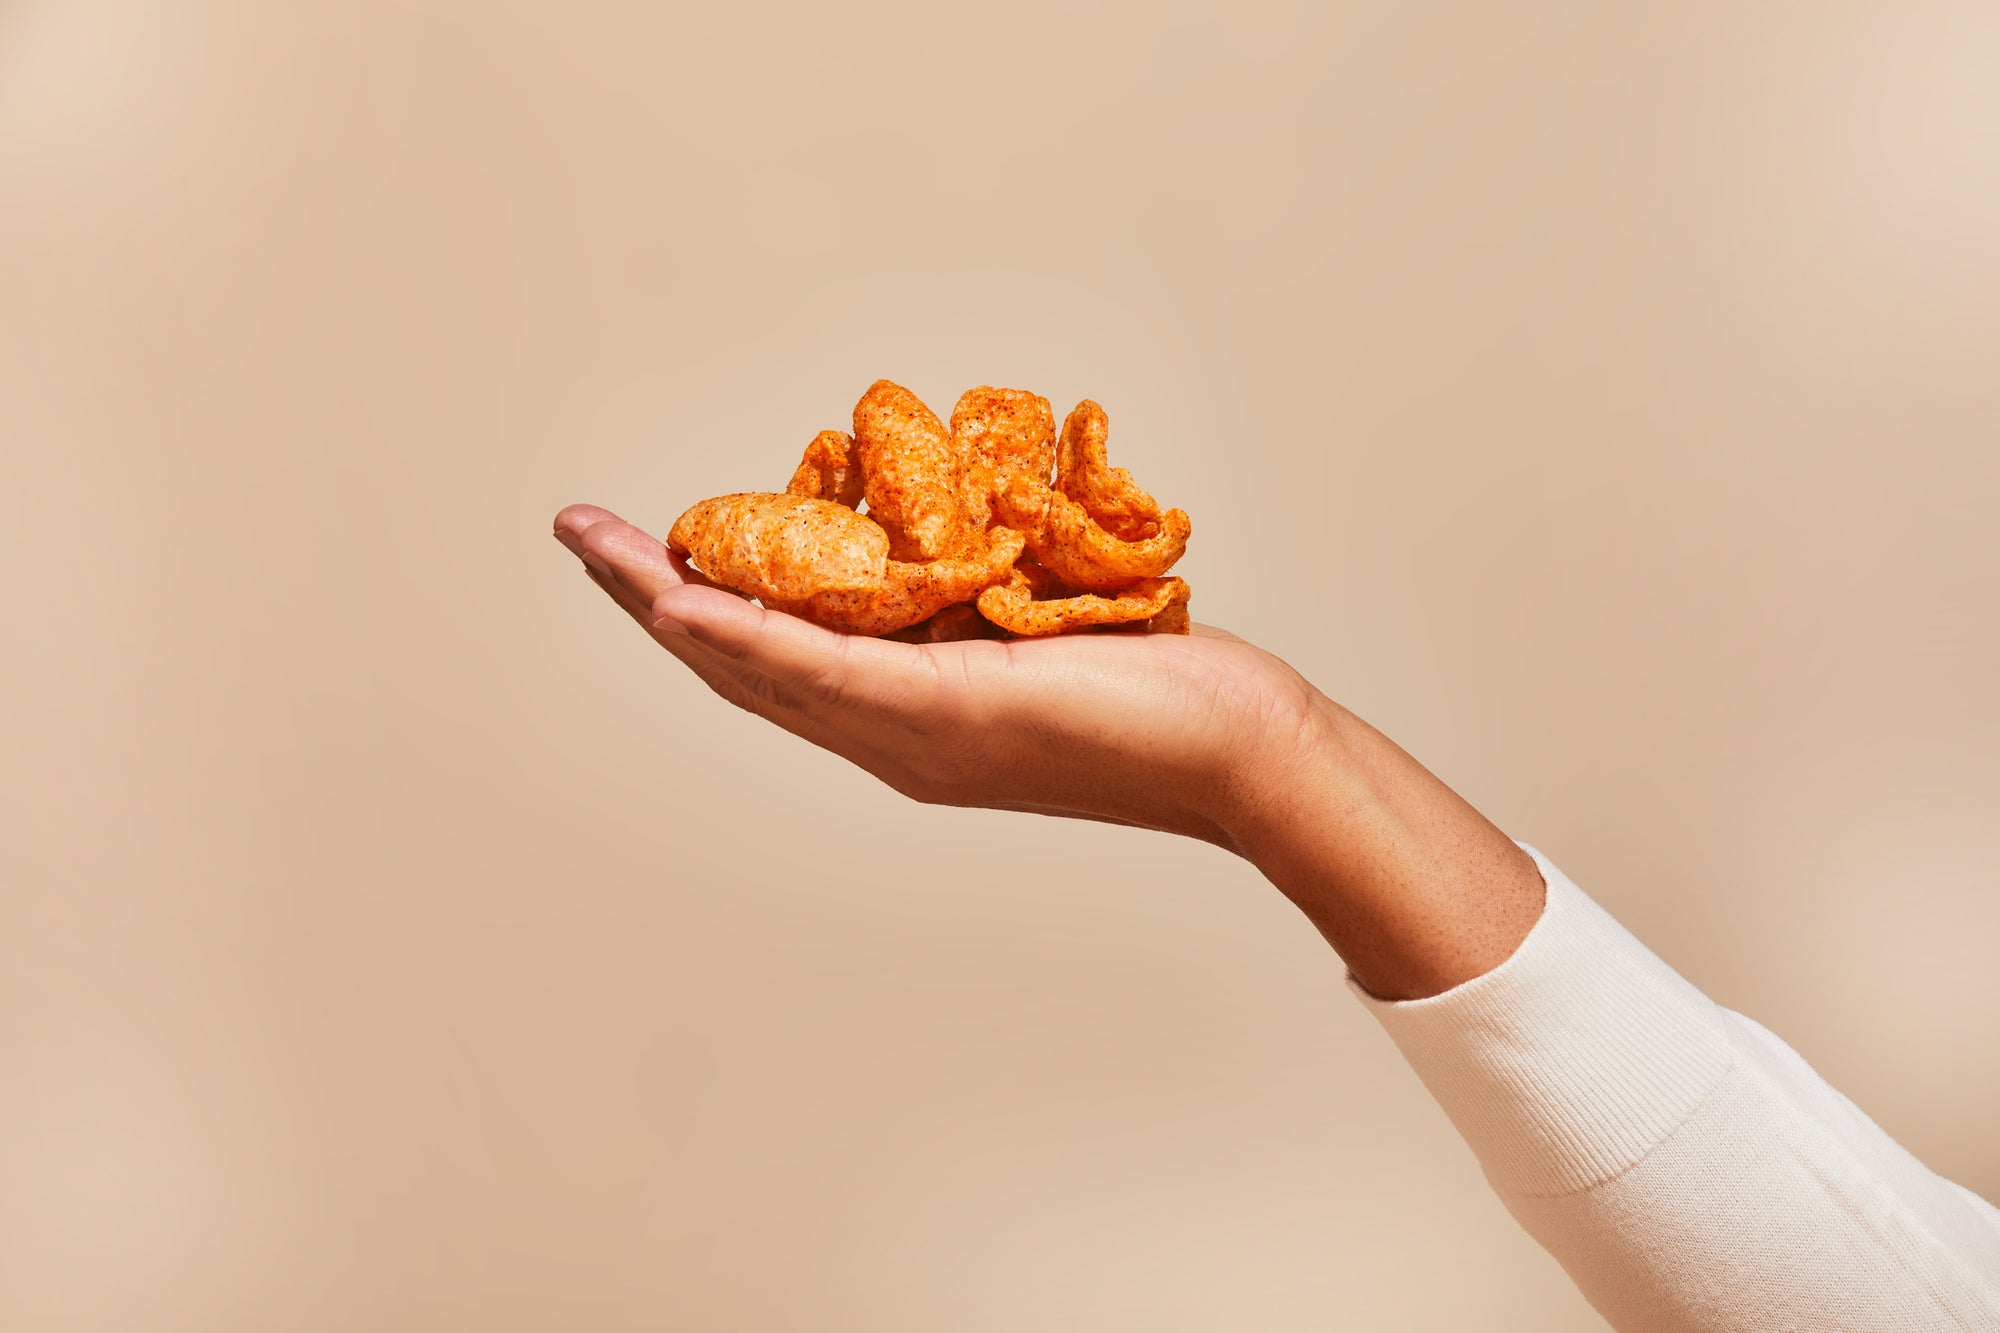 A delicious, crunchy stack of fried chicharrones in the palm of your hand